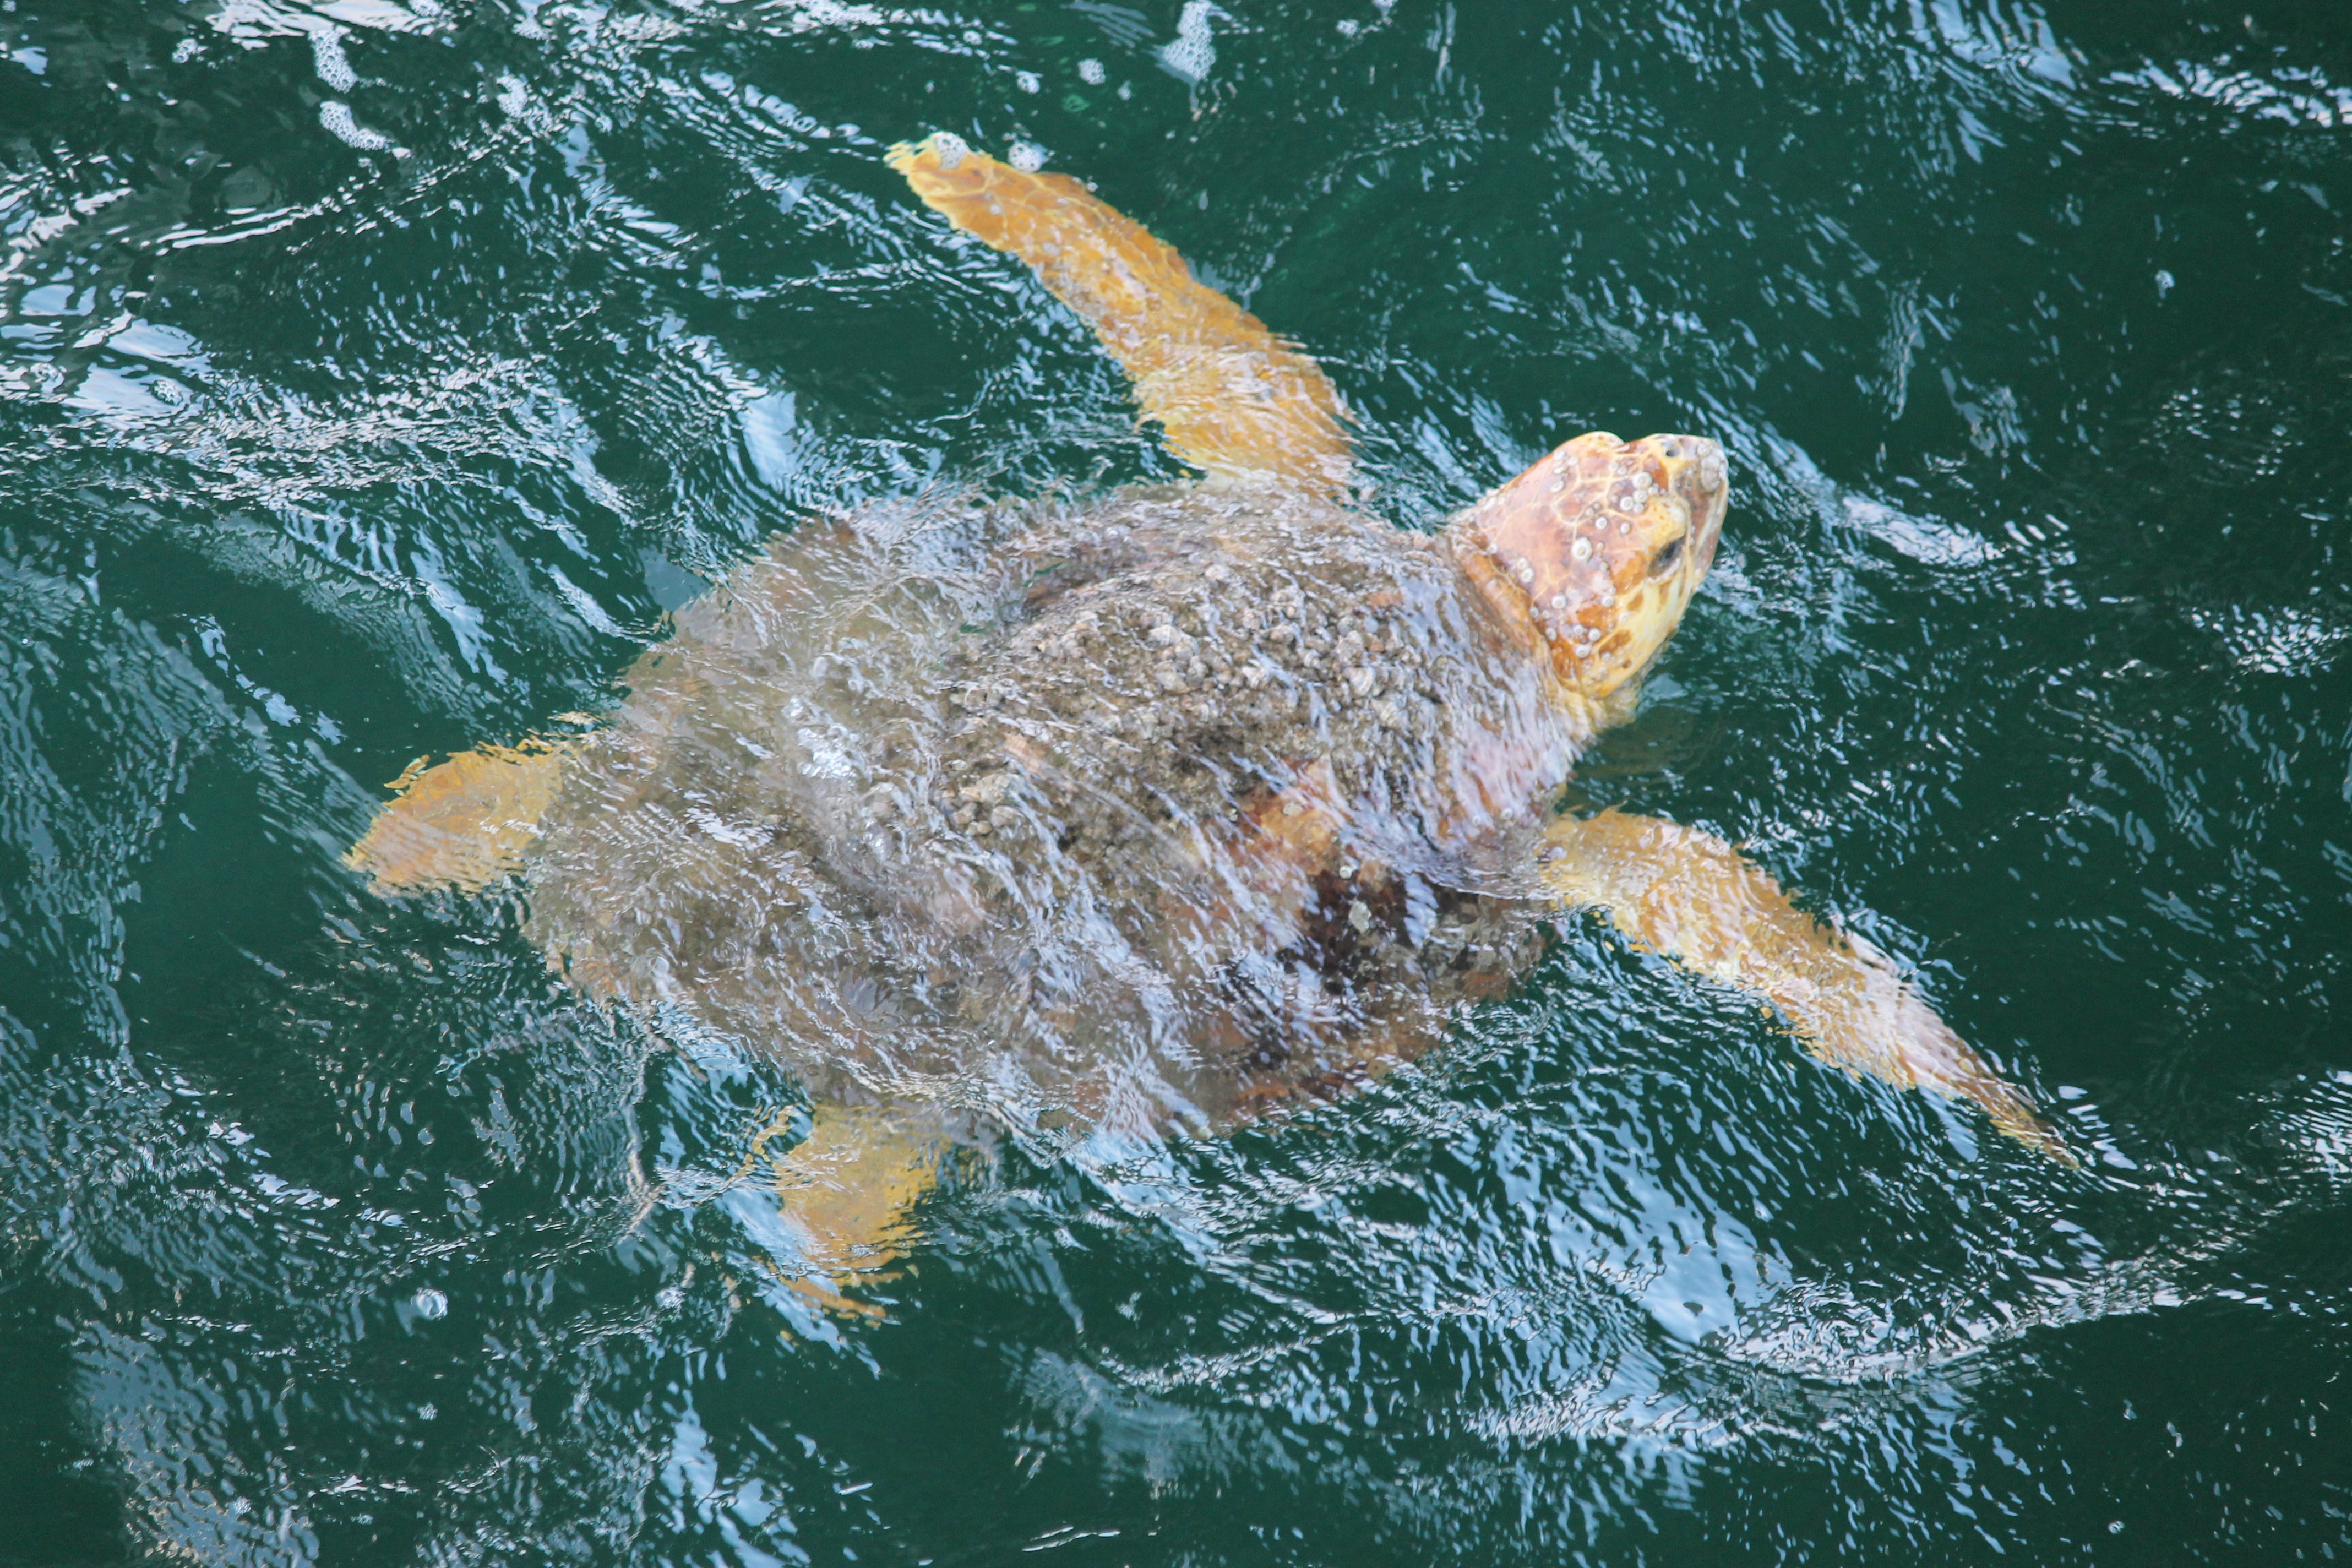 Loggerhead Sea Turtle Spotted from the Pier. Photo by Farren Dell